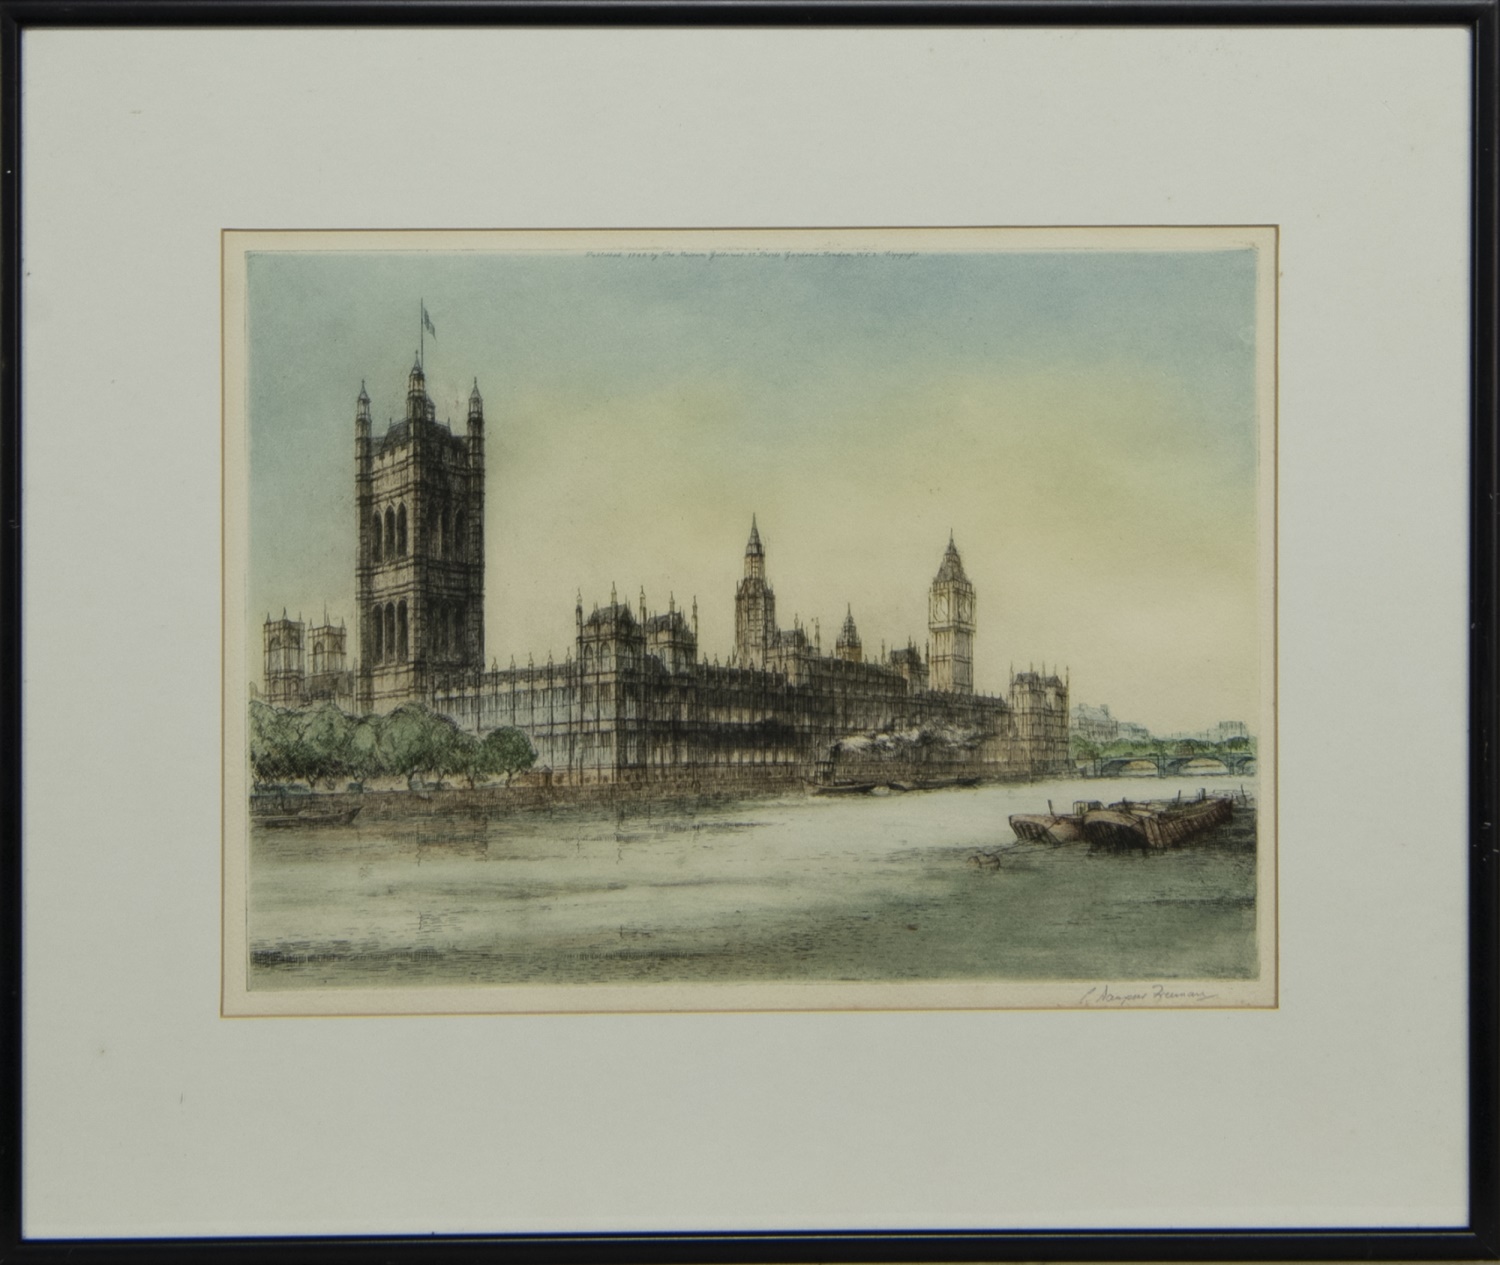 PALACE OF WESTMINSTER, AN ETCHING